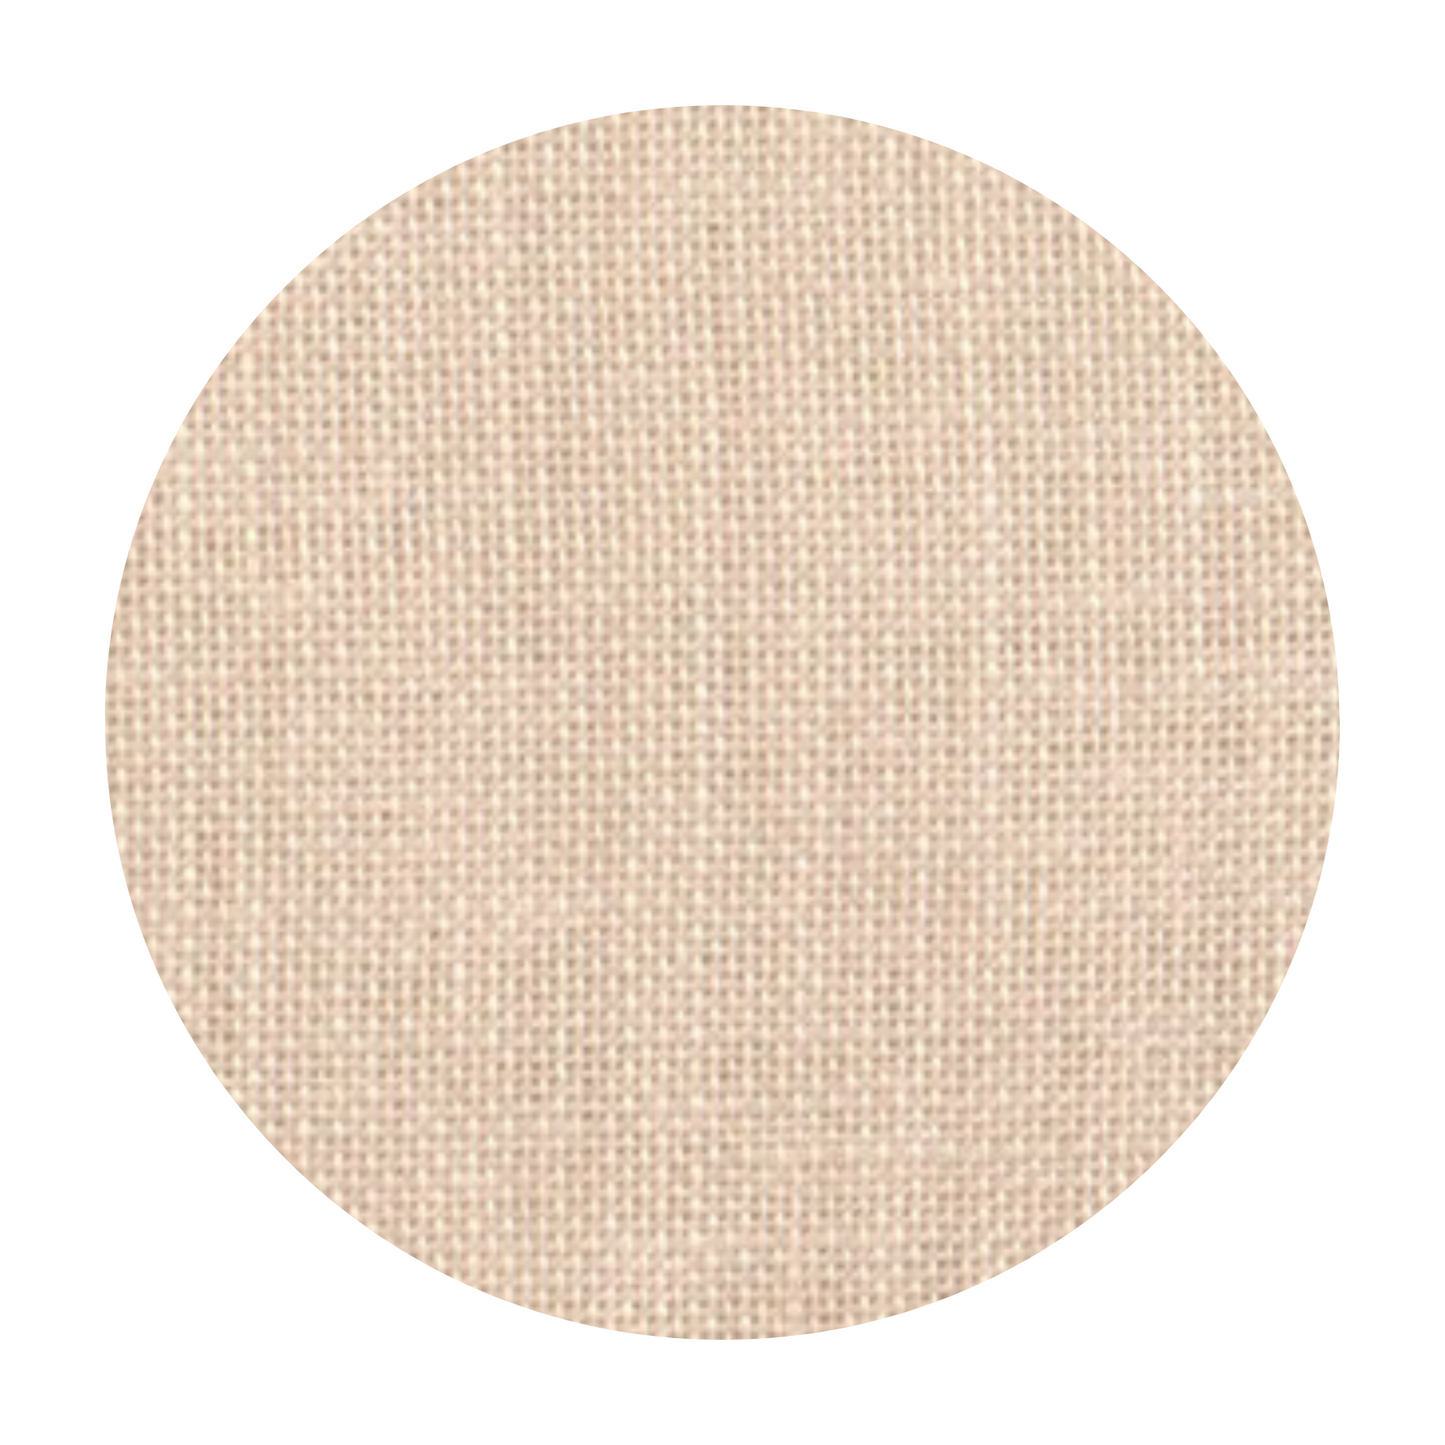 32 ct Country French Latté Linen - $0.078/sq in